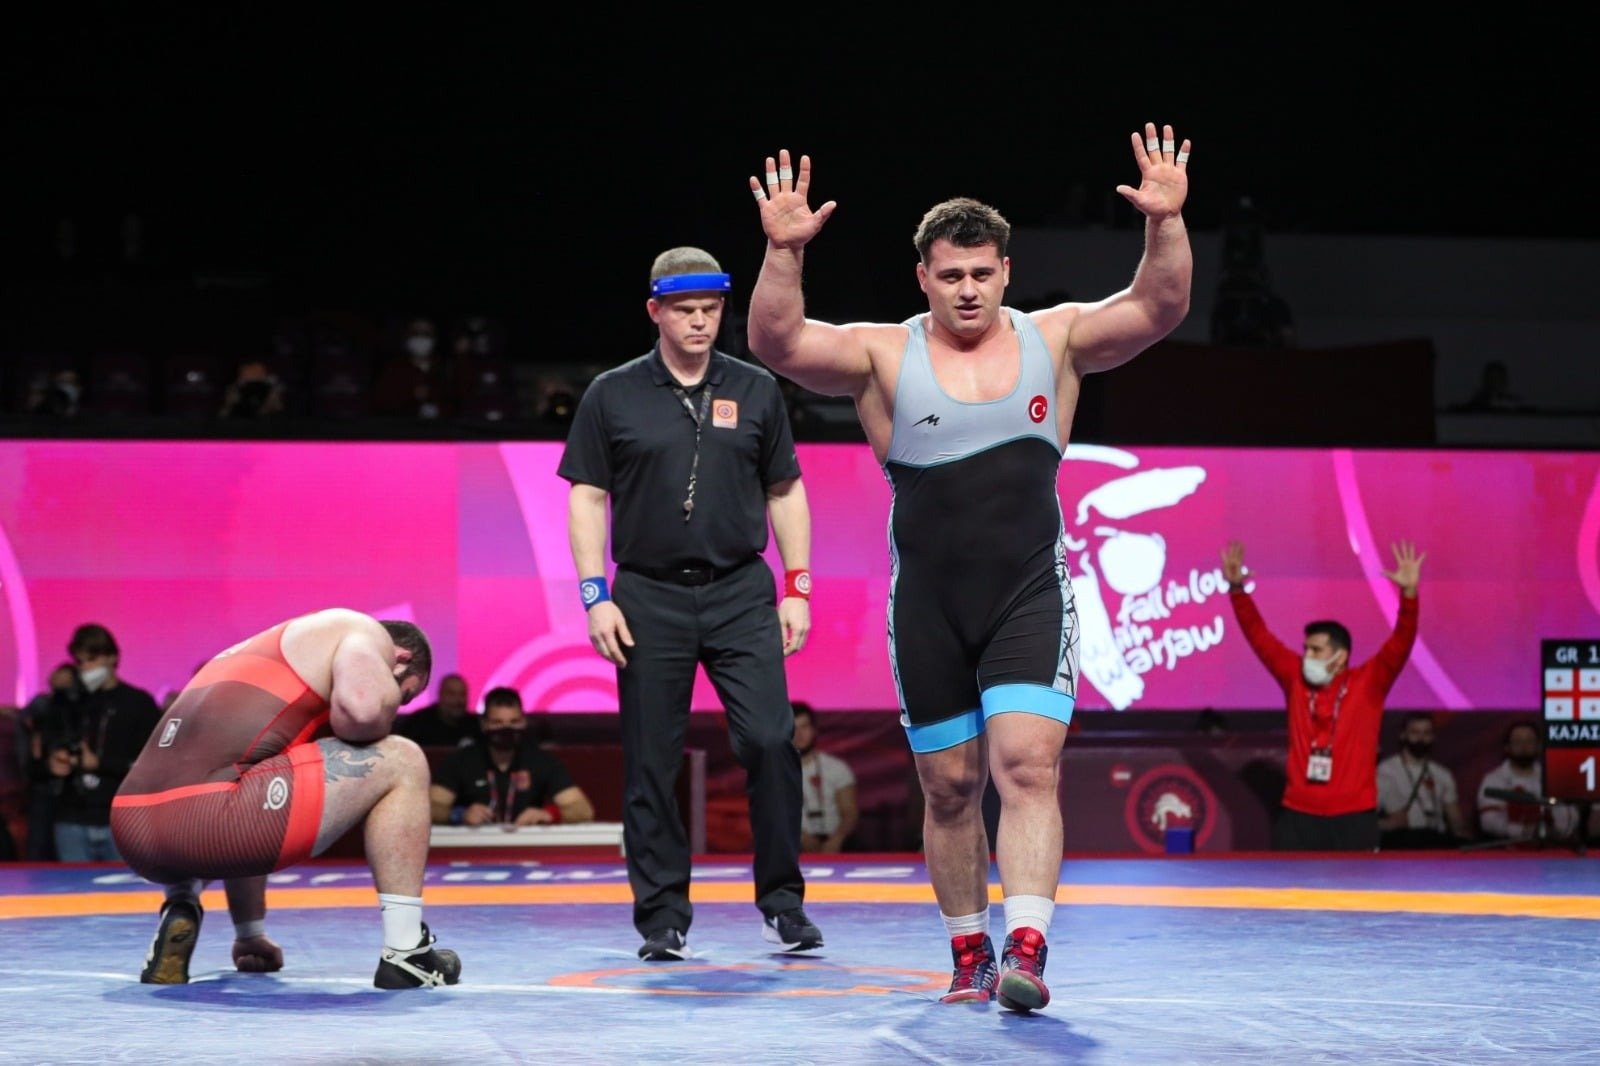 Rıza Kayaalp celebrates after winning the European title match in the 130 kg. category for the 10th time, Warsaw, Poland, April 24, 2021. (DHA Photo)